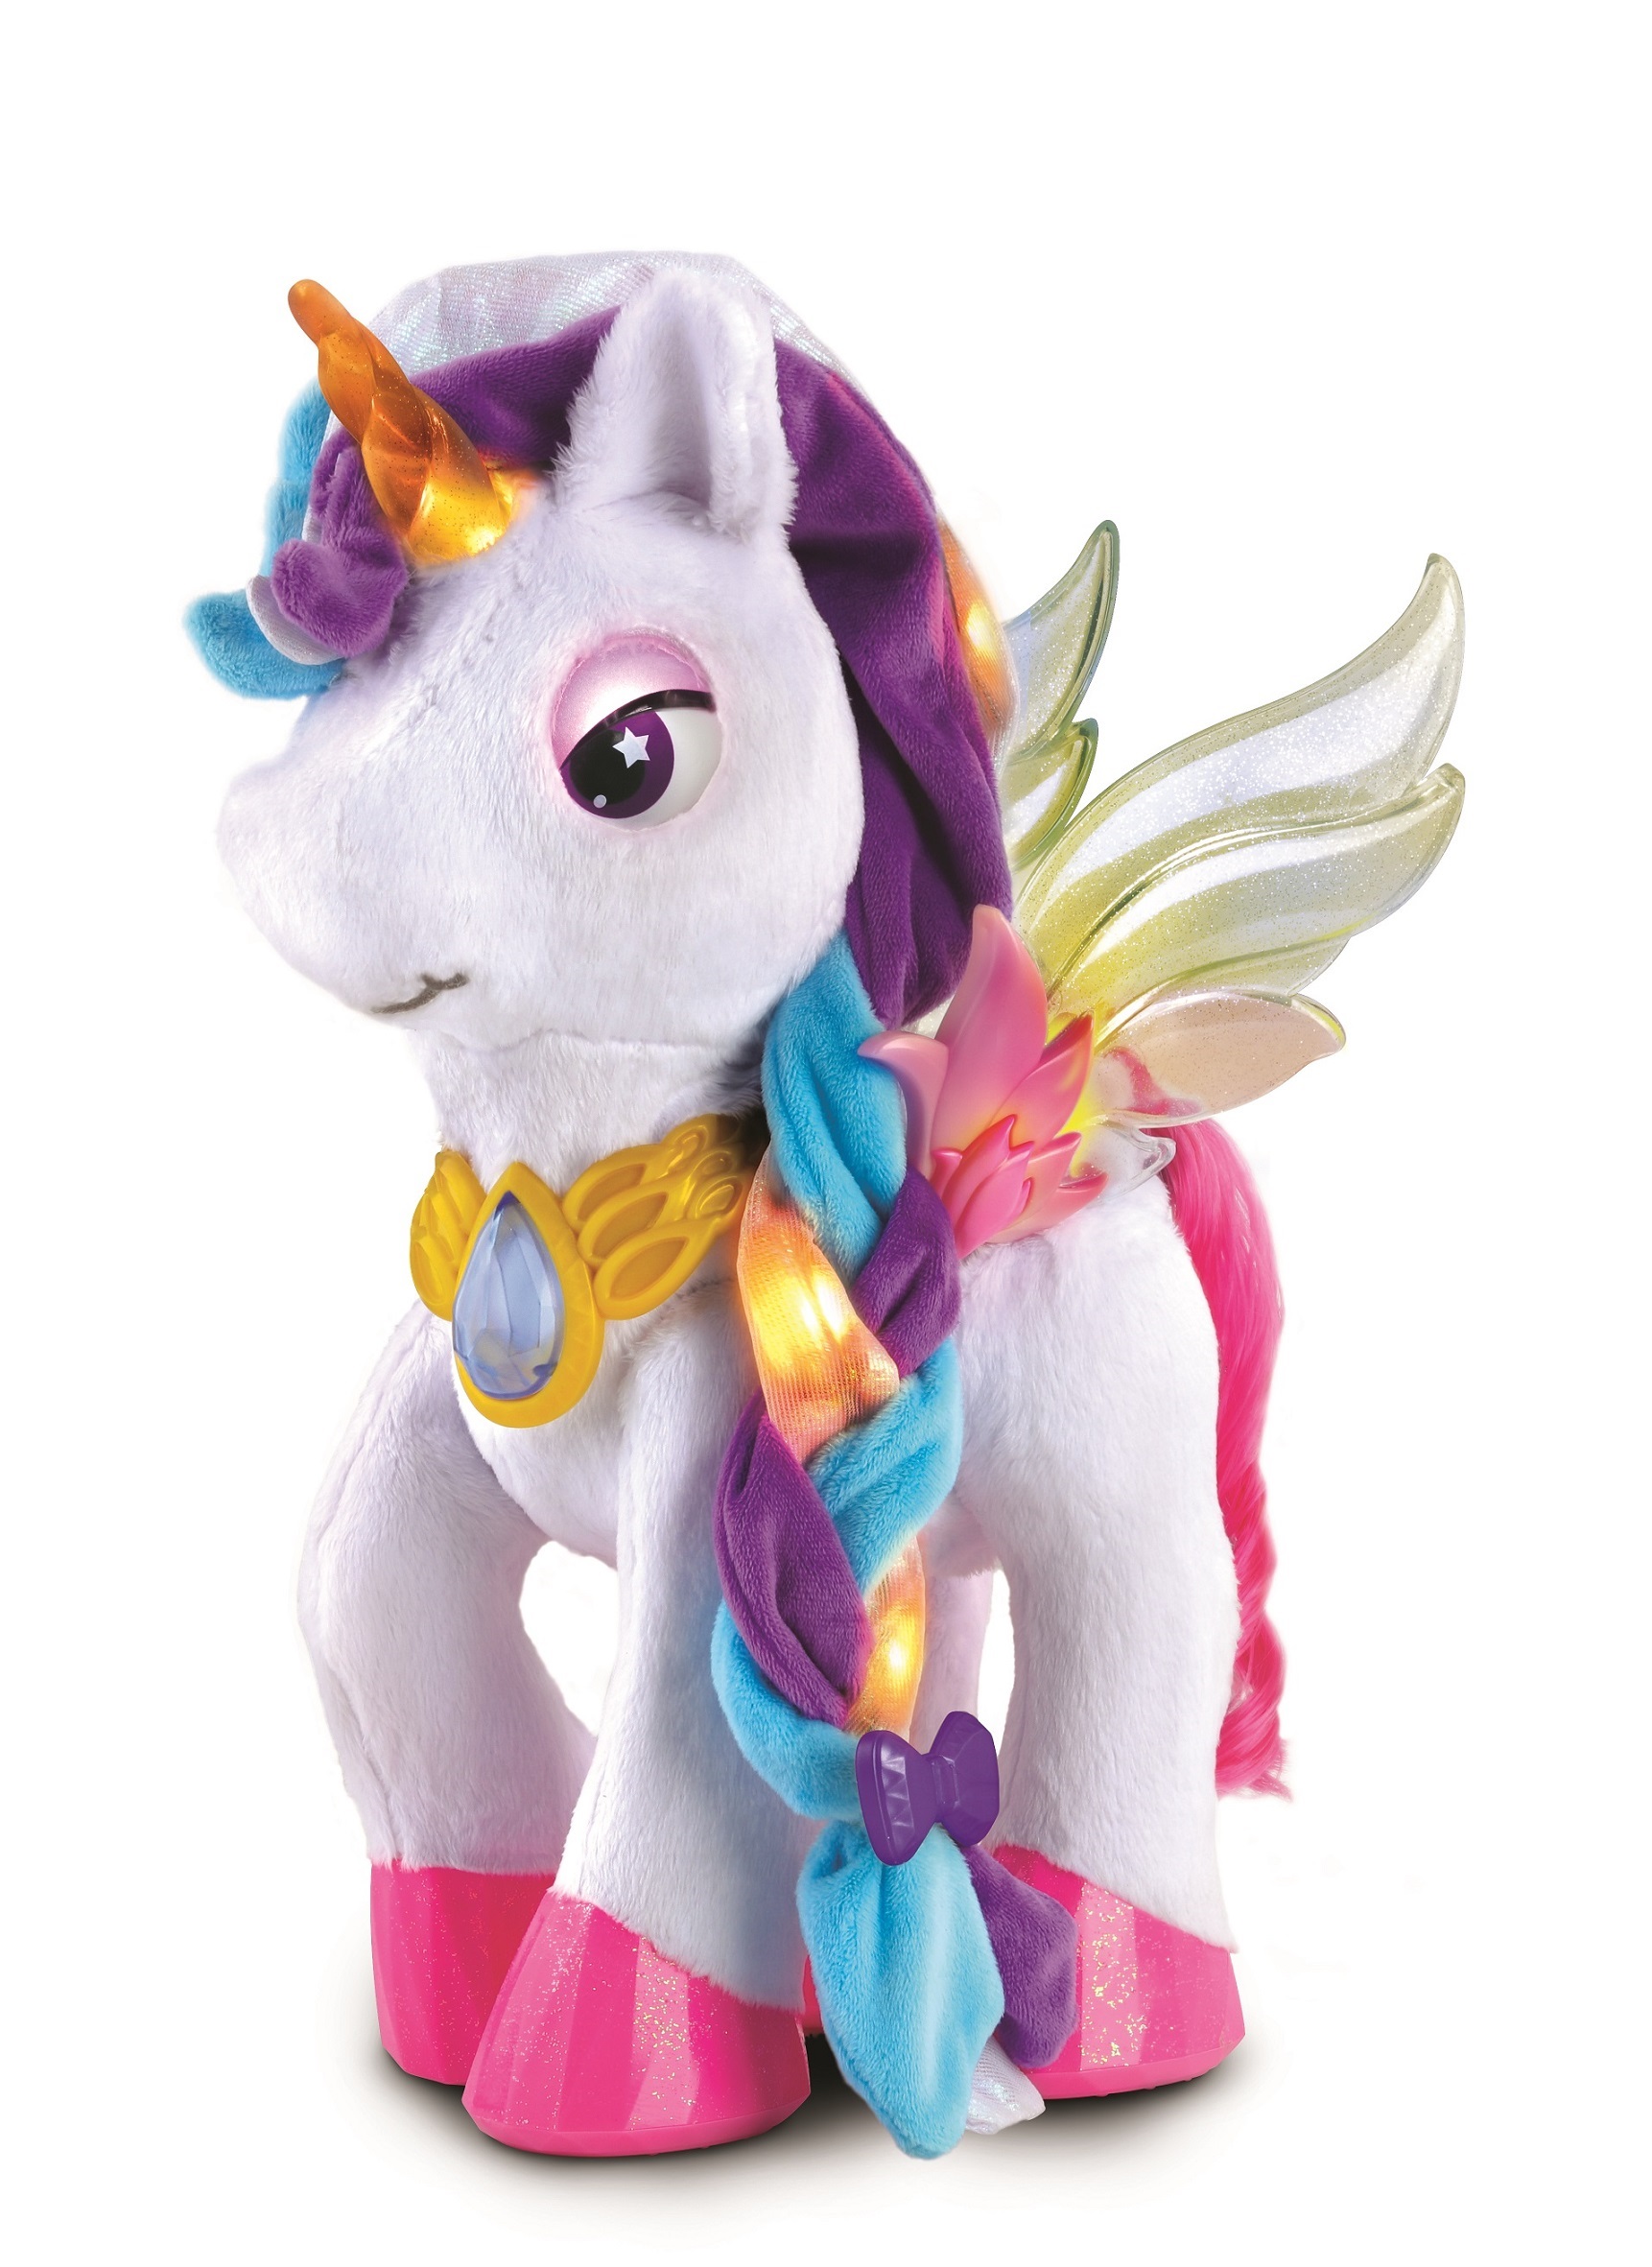 VTech® Makes Debut in Robotics Toy Category with Myla the Magical